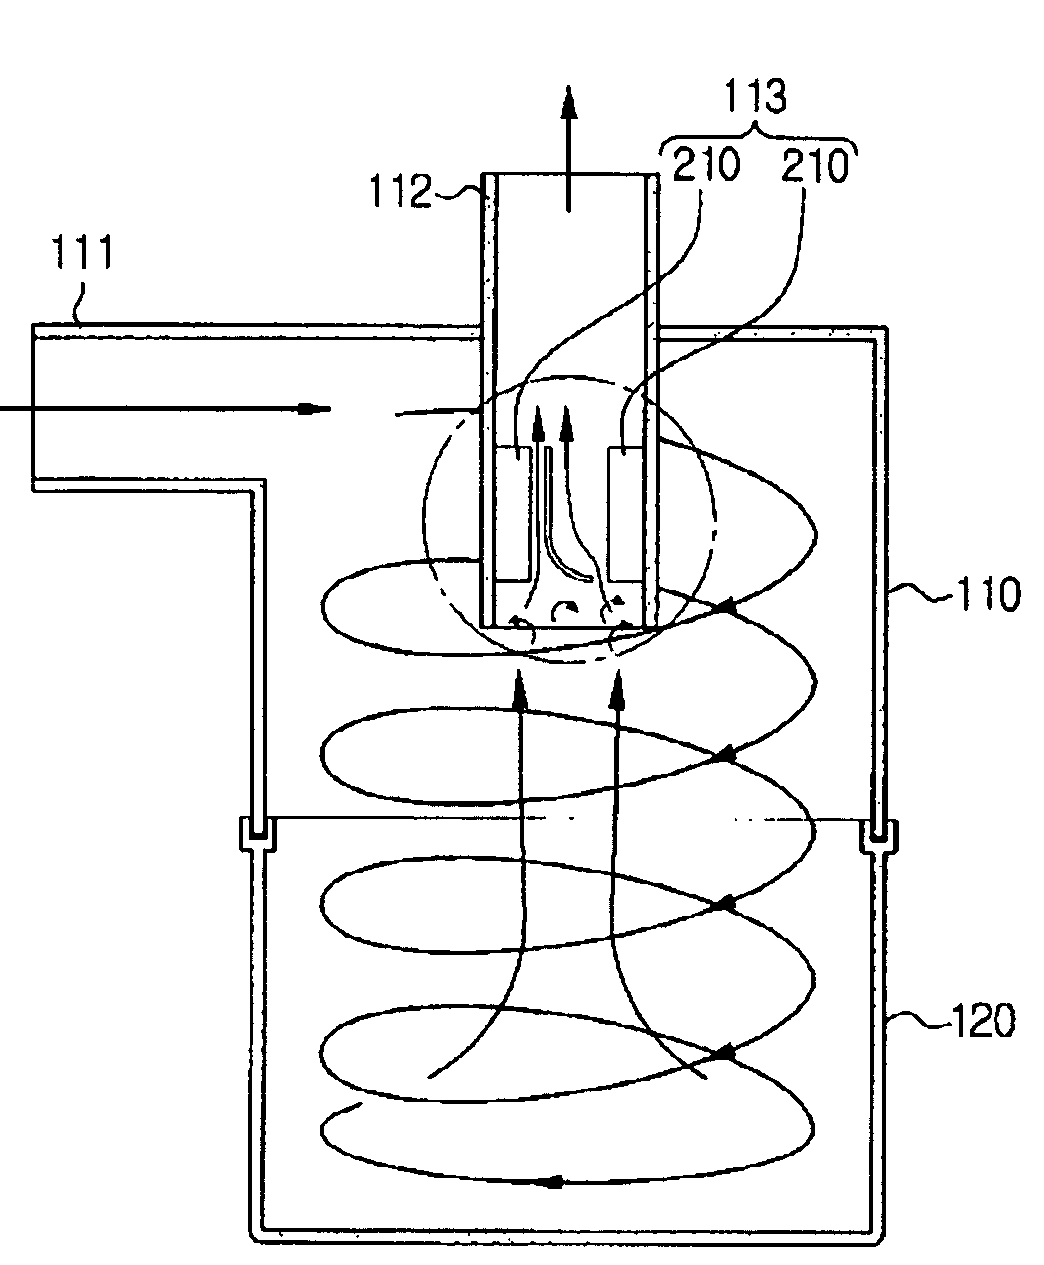 Cyclone dust collecting apparatus